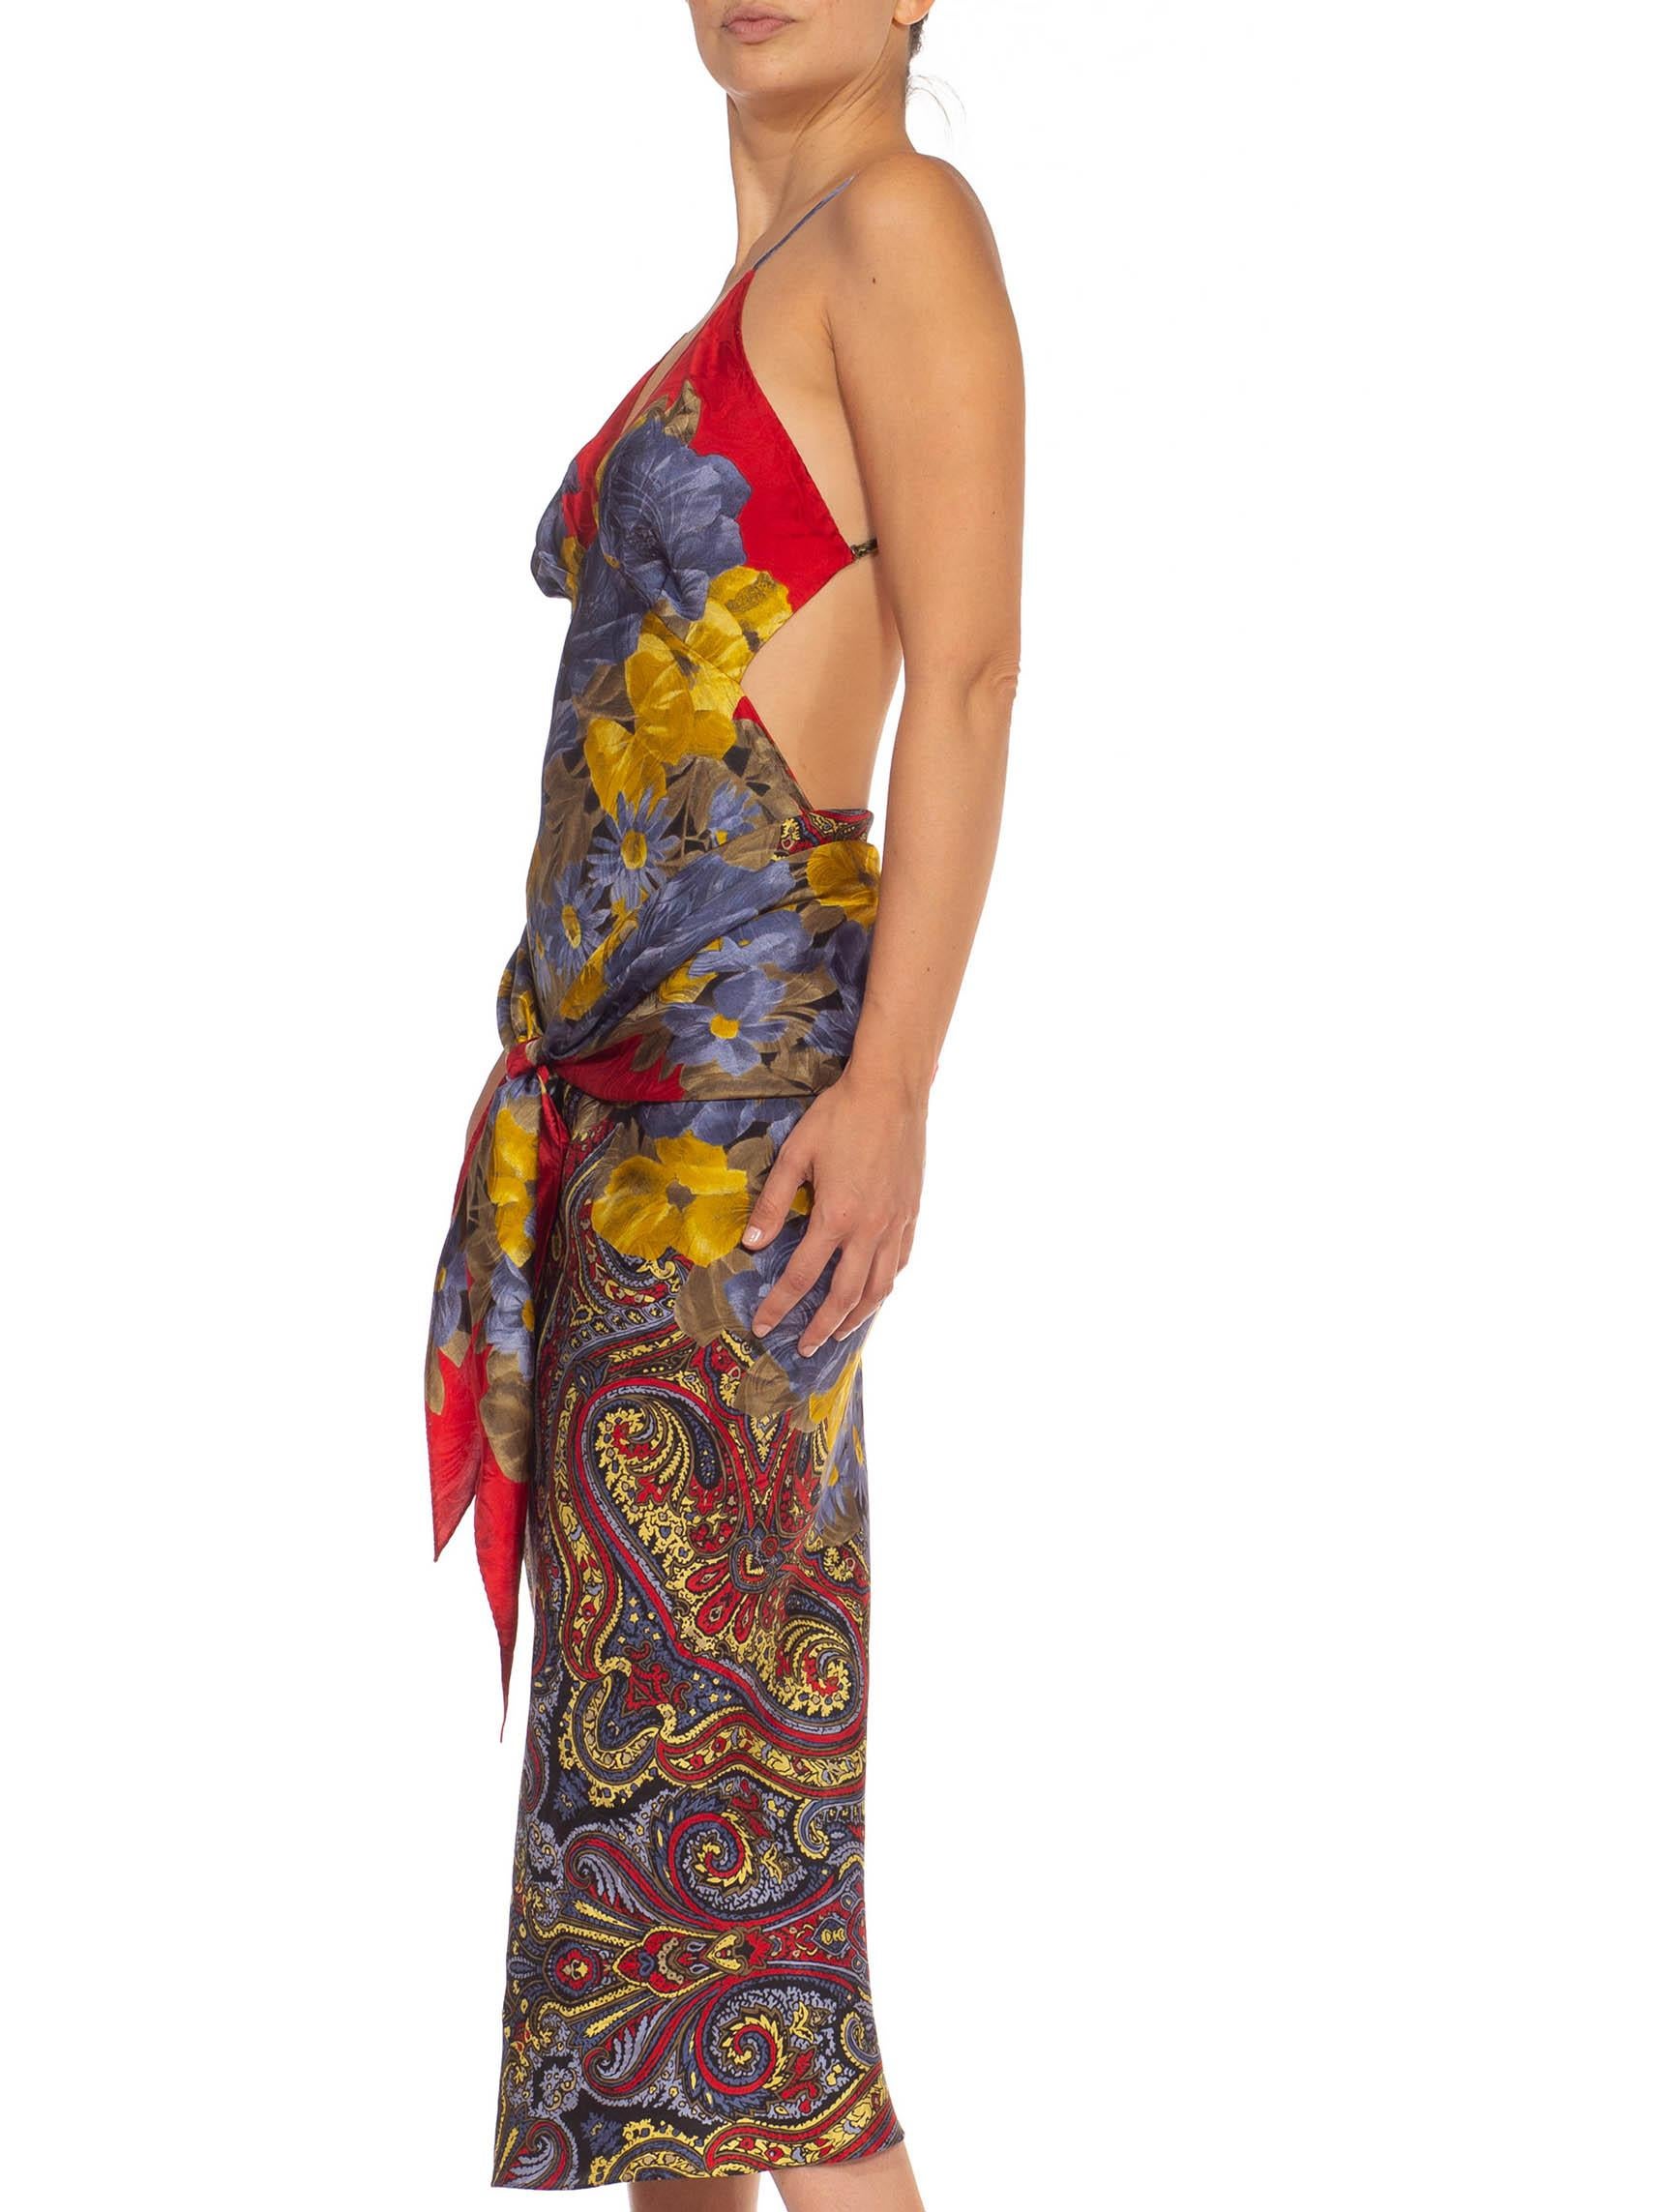 MORPHEW COLLECTION Red Blue & Yellow Silk Sagittarius Dress Made From Vintage Scarves